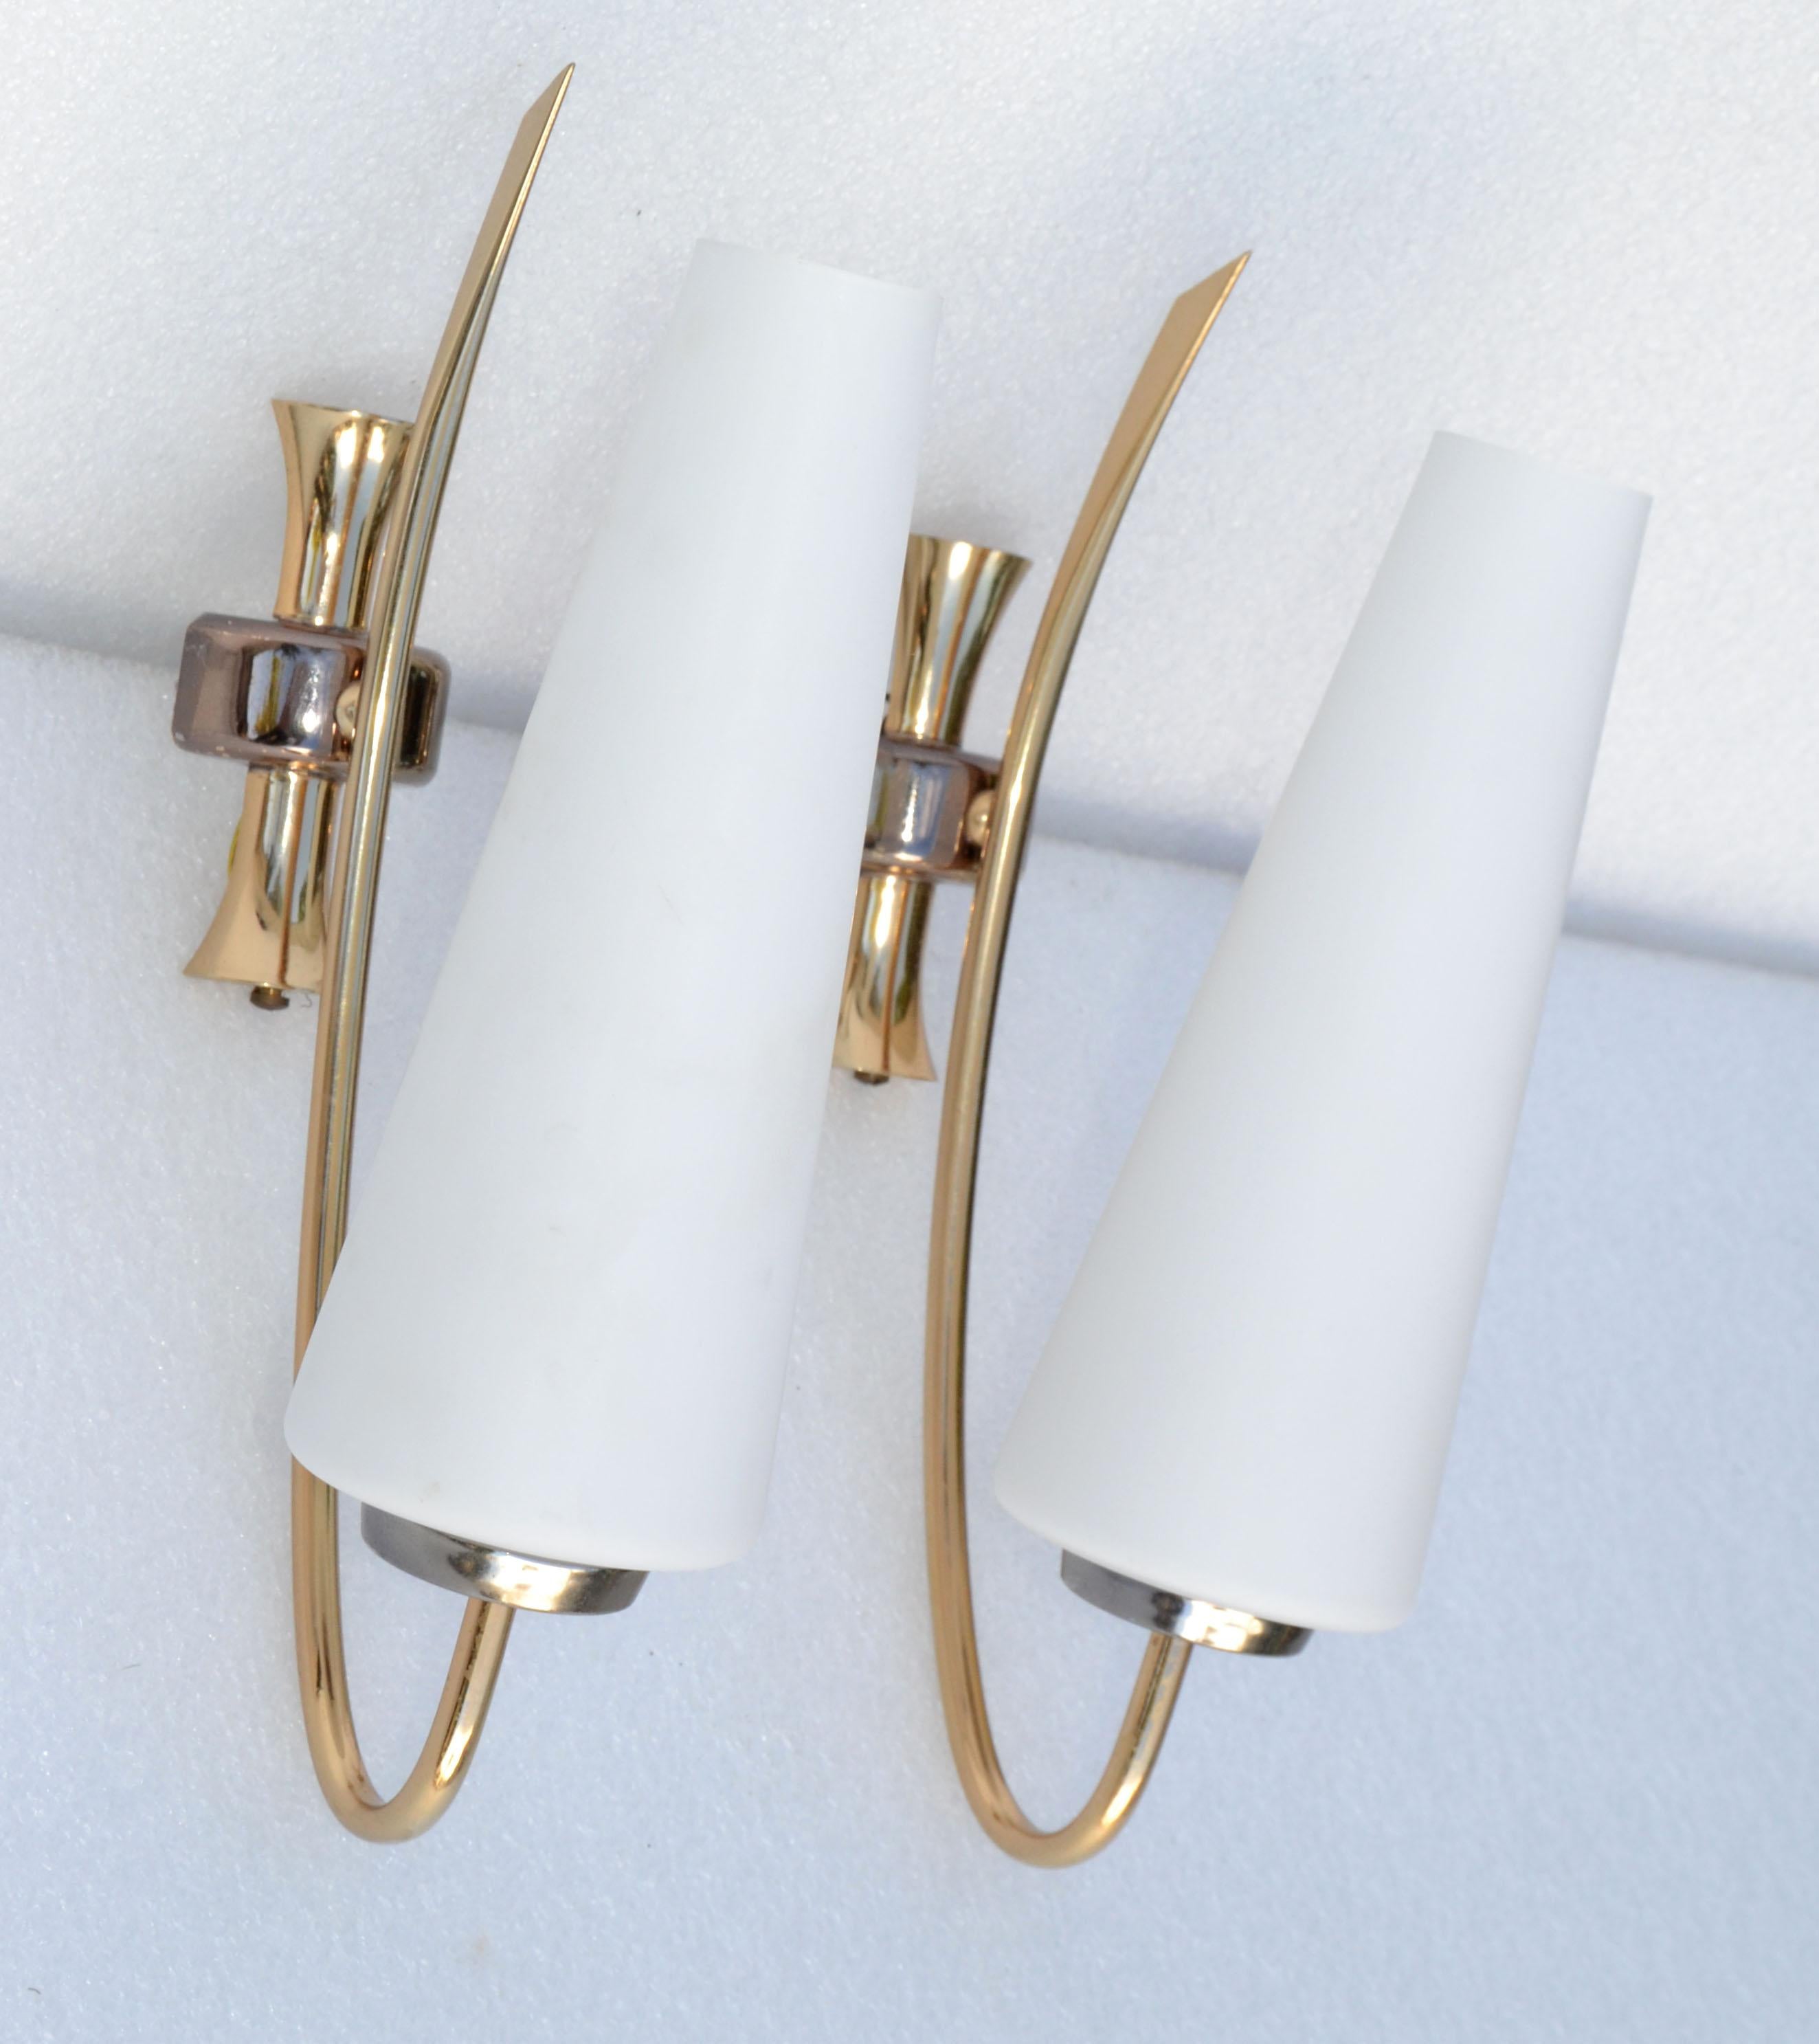 Pair of Maison Lunel sconce, wall light with original cone Opaline shades, made out of two patina Brass.
Superb French Design from the 1960s.
Each Sconces takes 1 light bulbs with max. 40 watts, LED work too.
Back Plate measures: 2 x 1